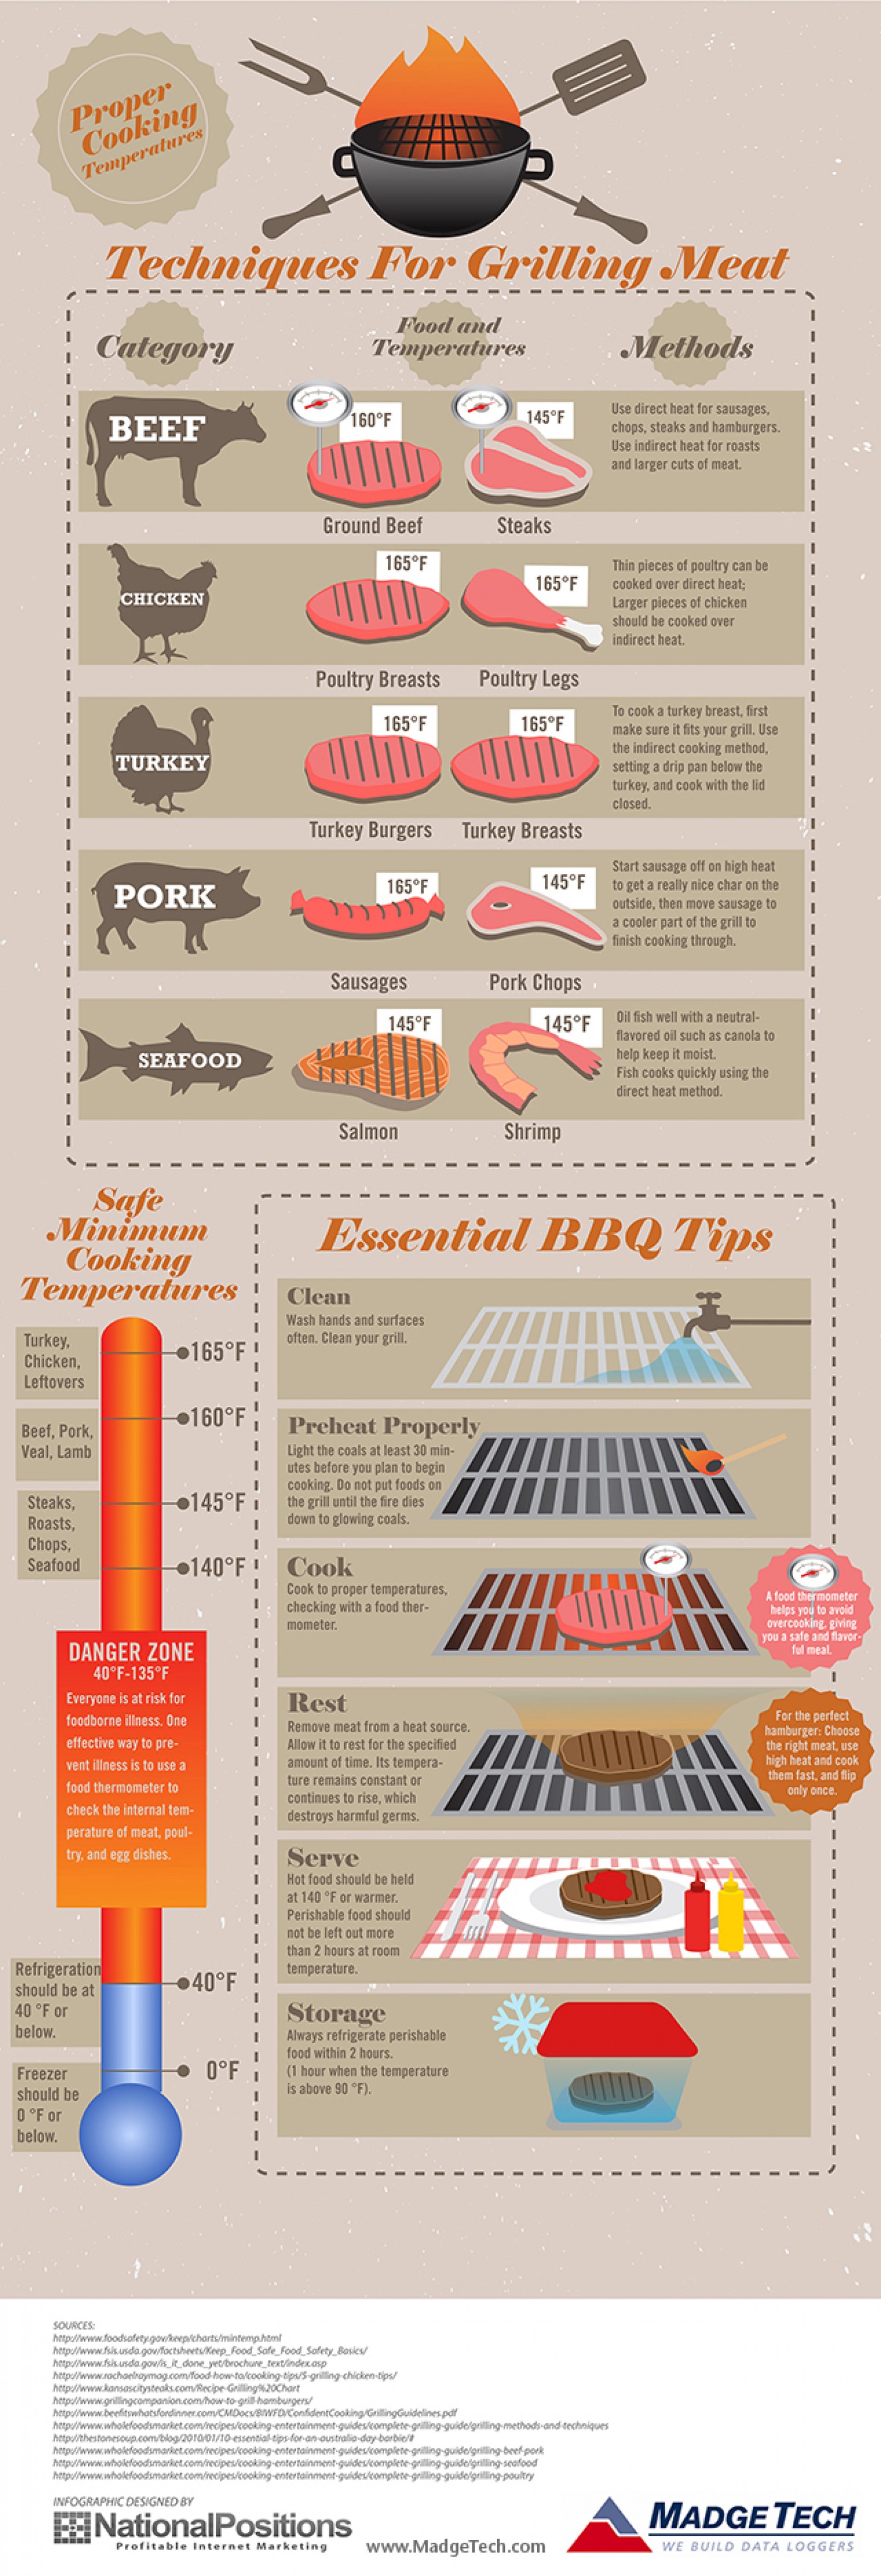 Food Facts For A Safe And Happy BBQ Season